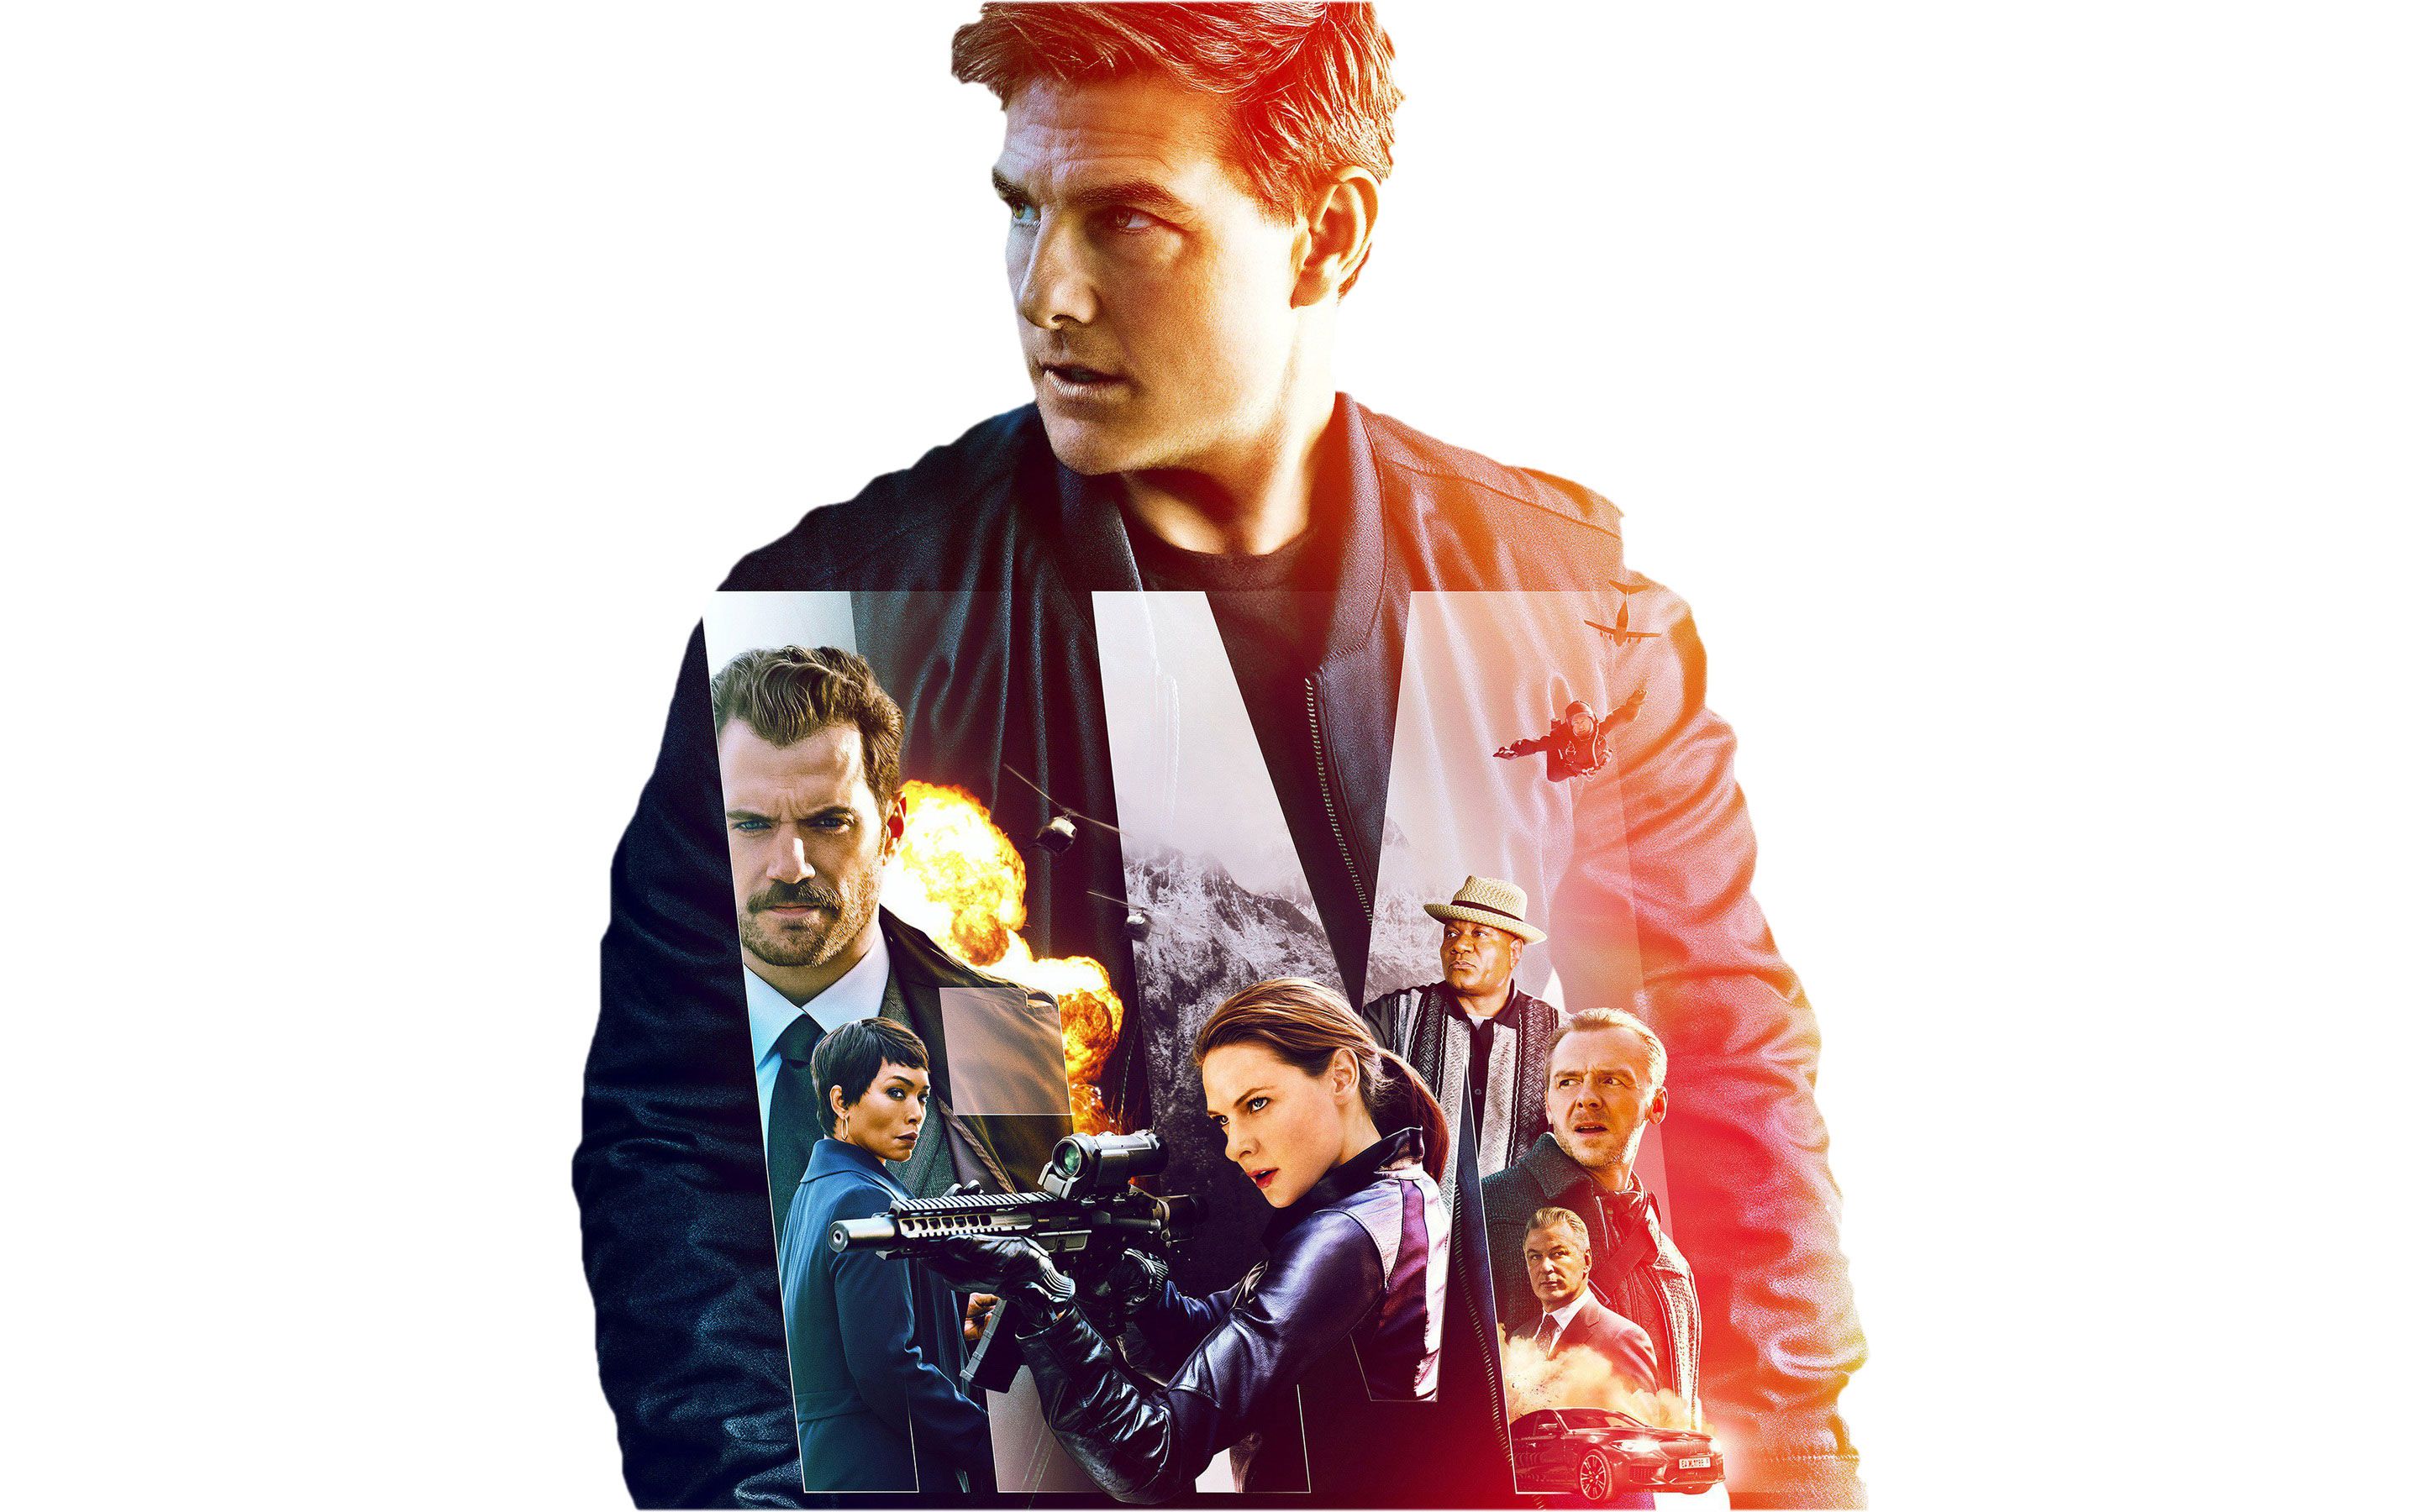 Tom Cruise Mission Impossible Fallout Wallpaper